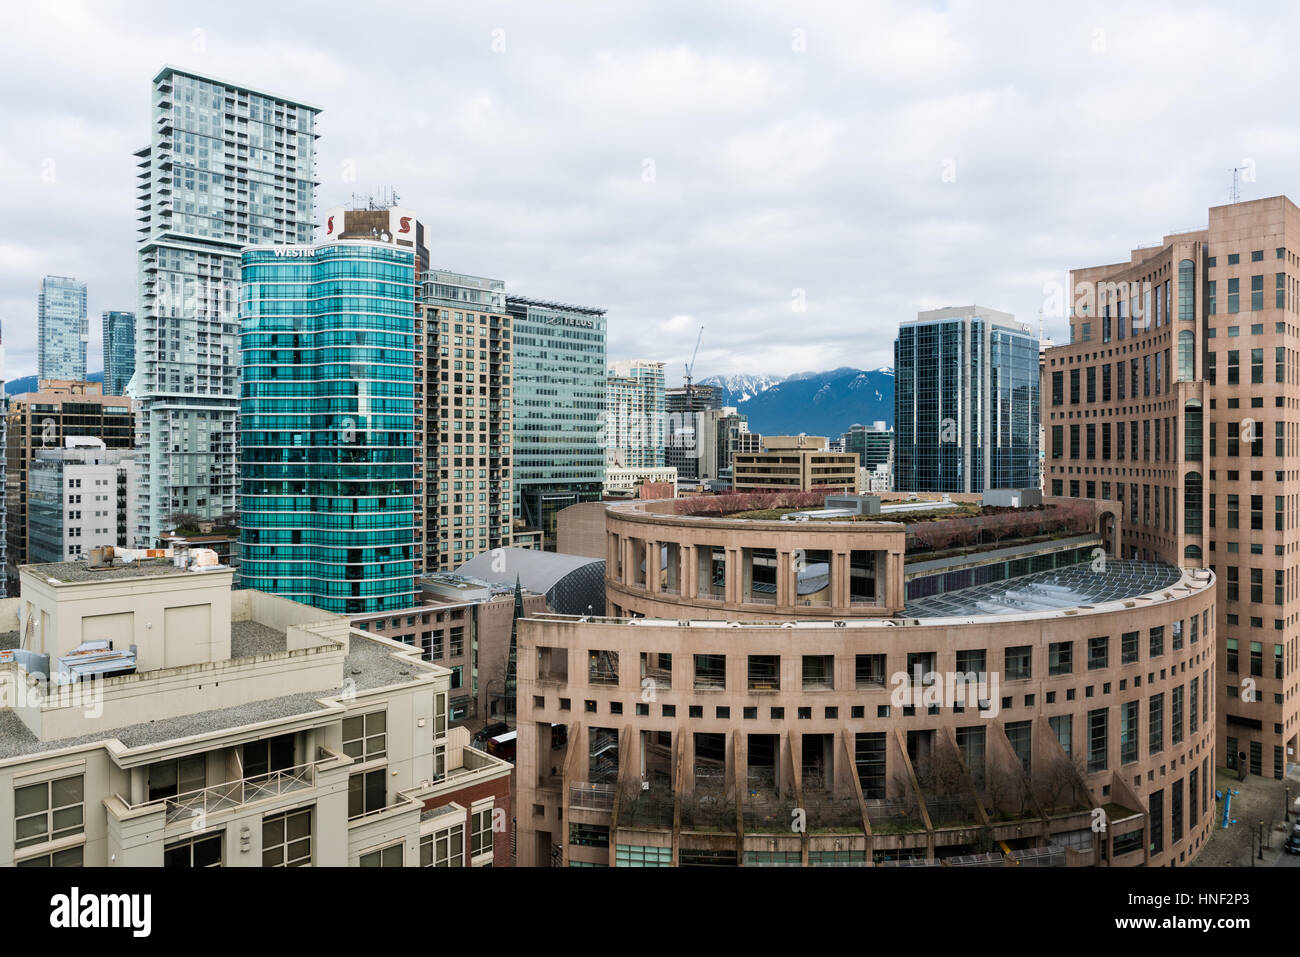 Vancouver public library from high view point with other high rise buildings Stock Photo